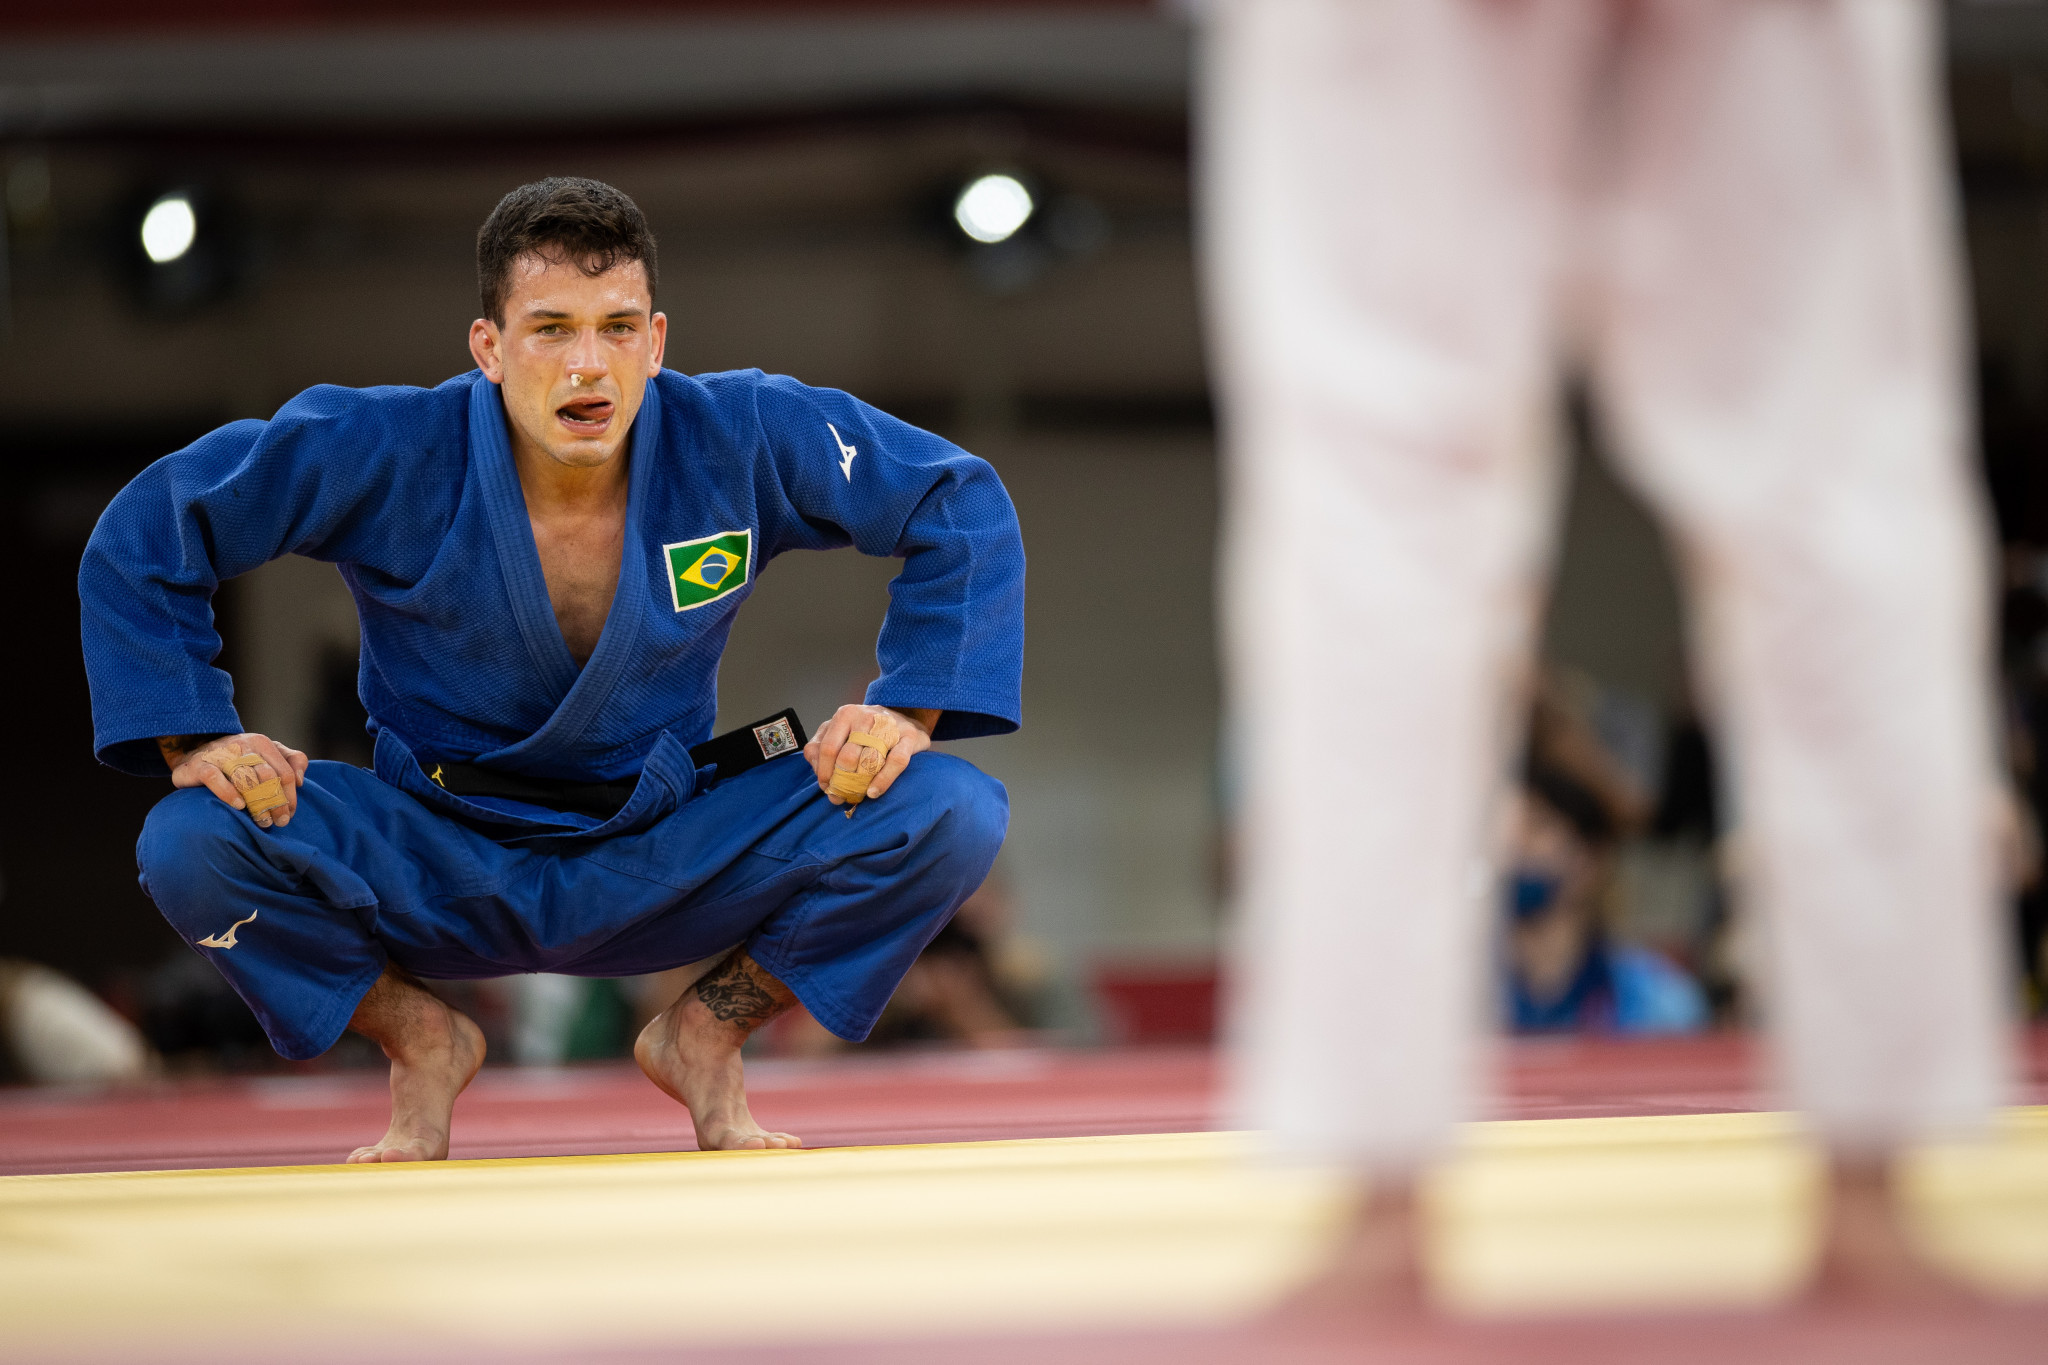 Merged Pan AmericanOceania Judo Championships set to feature 25